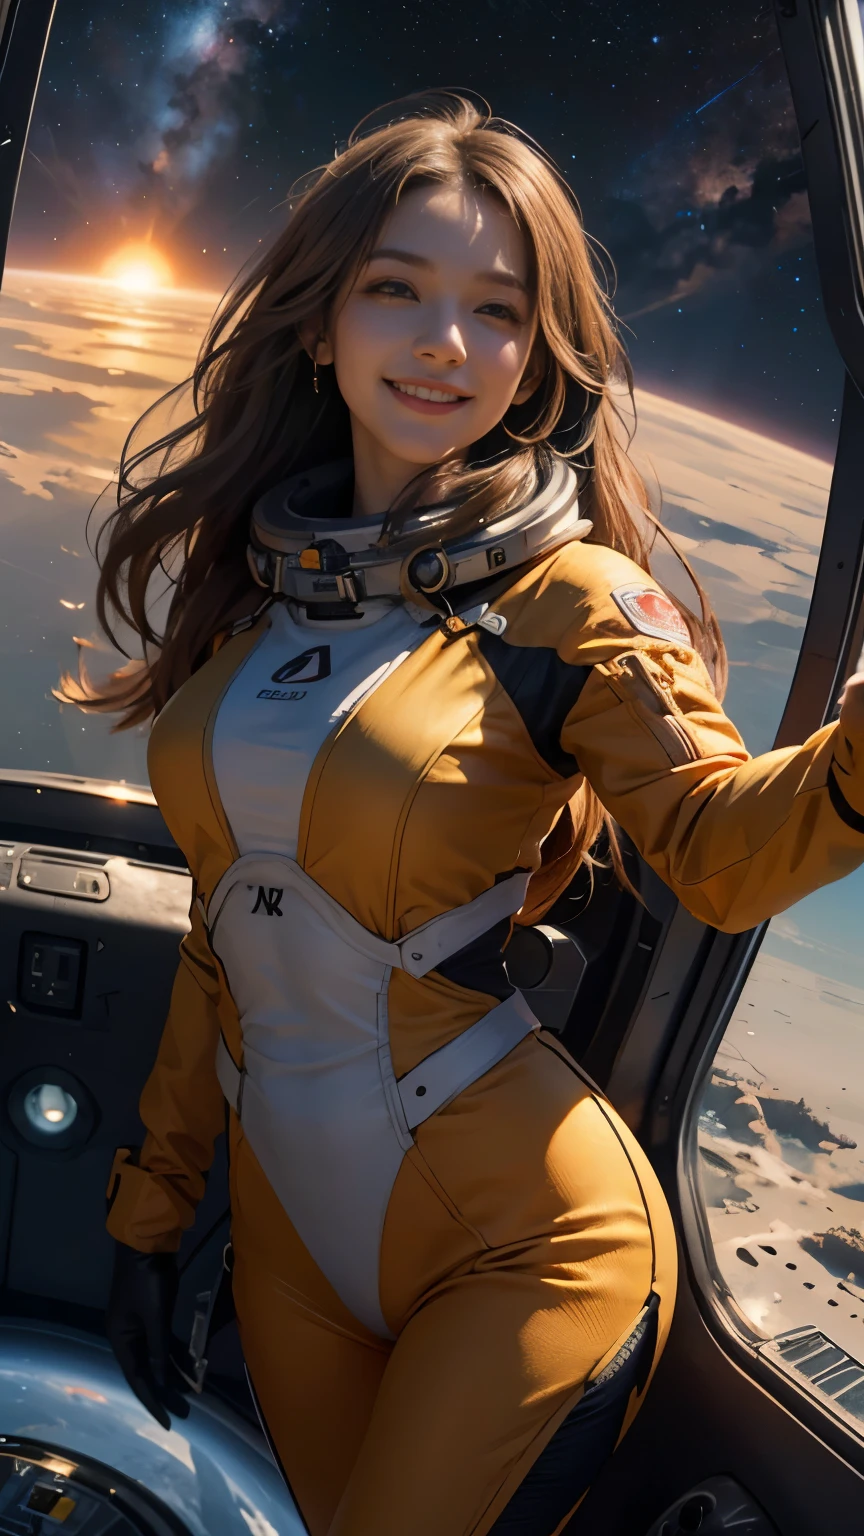 xxmixgirl,1girl, fisheye, selfie, wind, messy hair, sunset,smiling,FilmGirl, Generate a lively and enchanting scene portraying a girl with flowing hair, radiating joy in a orange spacesuit. Picture her inside a futuristic spacecraft, capturing a moment of pure enthusiasm as she takes a selfie. planet mercury and huge sun visible in the background. The spacecraft's interior is sleek and modern, adorned with high-tech elements and large windows that offer breathtaking view of planet mercury from space in vast expanse of space galaxy, The girl's genuine smile reflects her excitement as she embarks on a journey to amercury, showcasing the adventurous spirit of space exploration, orange space suit. show case large burning sun in background